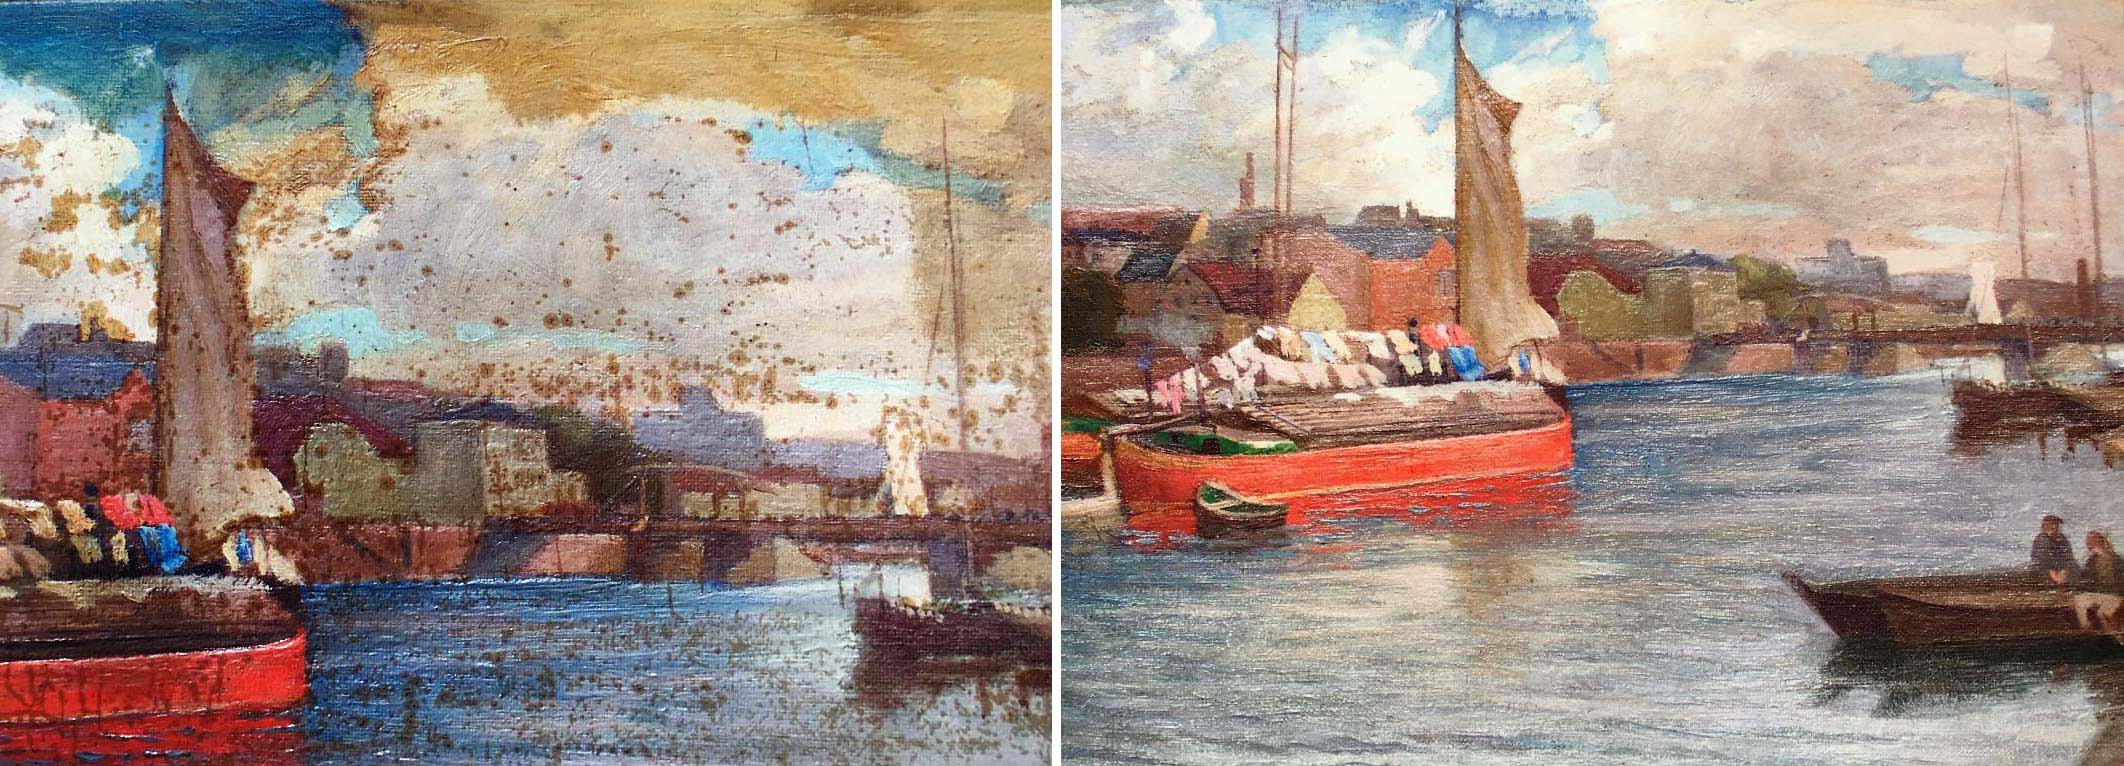 Two paintings of boats in a harbor.